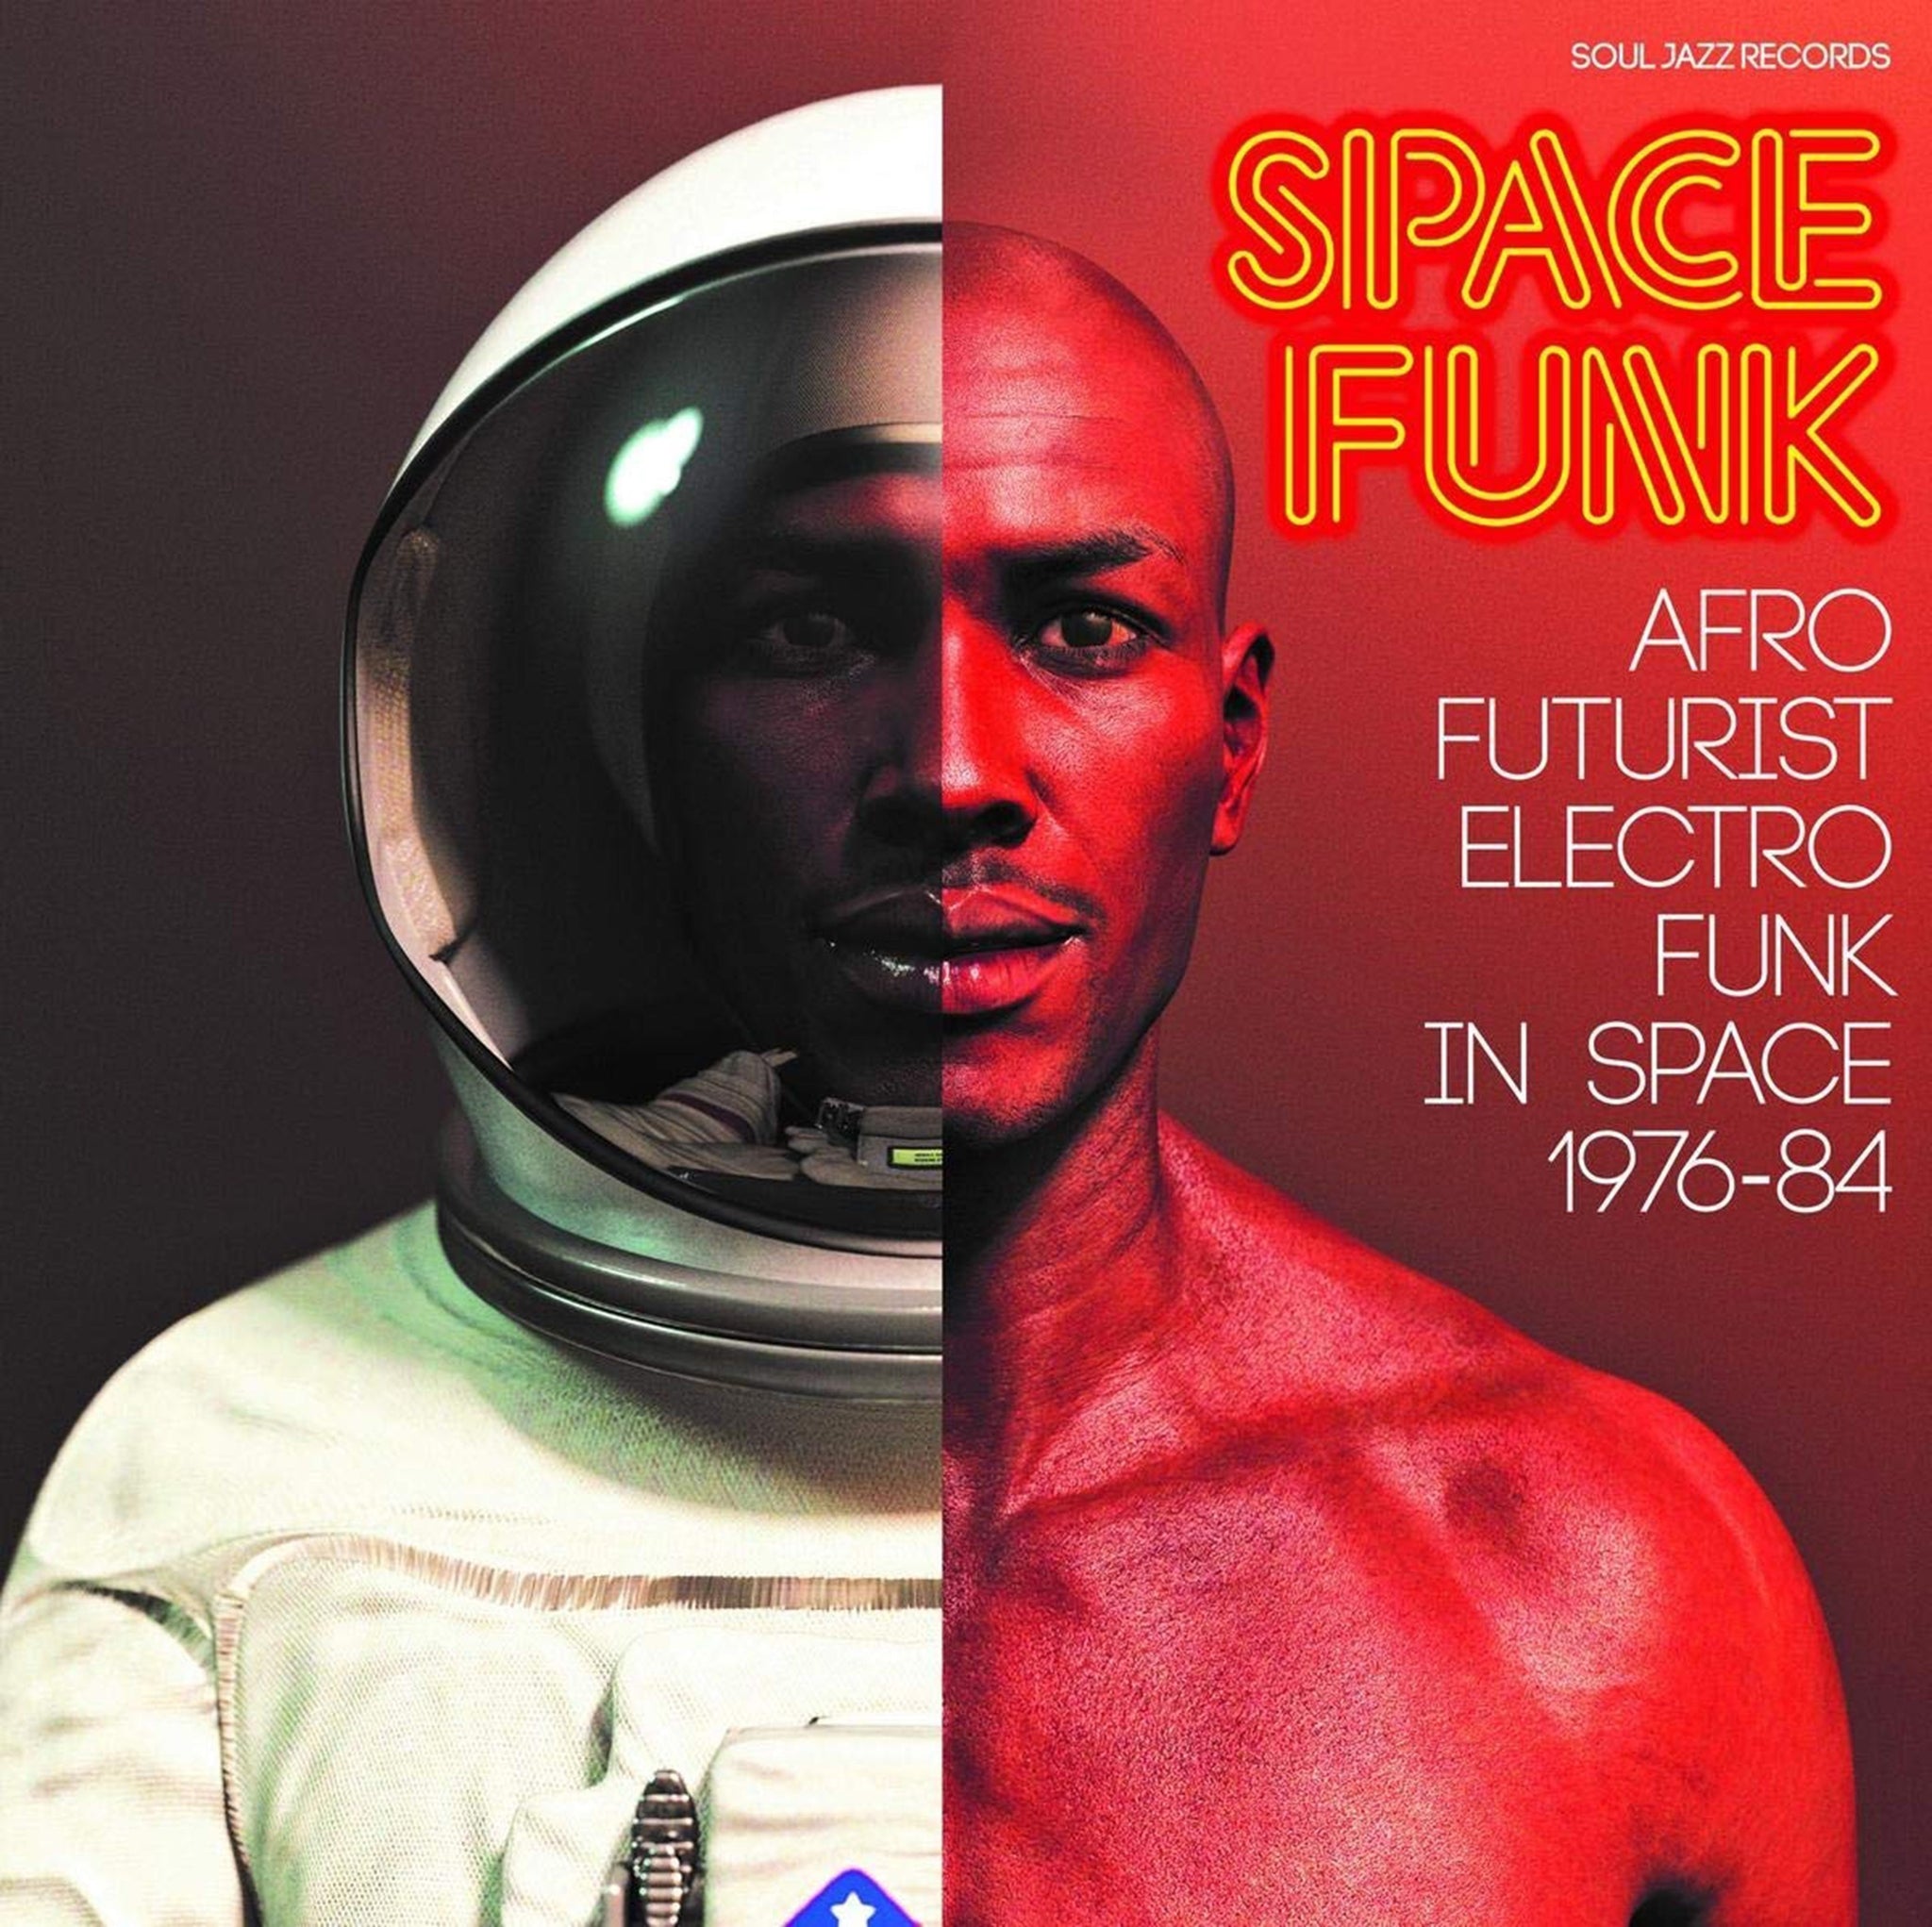 Soul Jazz Records Presents: Space Funk - Afro Futurist Electro Funk In Space 1976 - 84